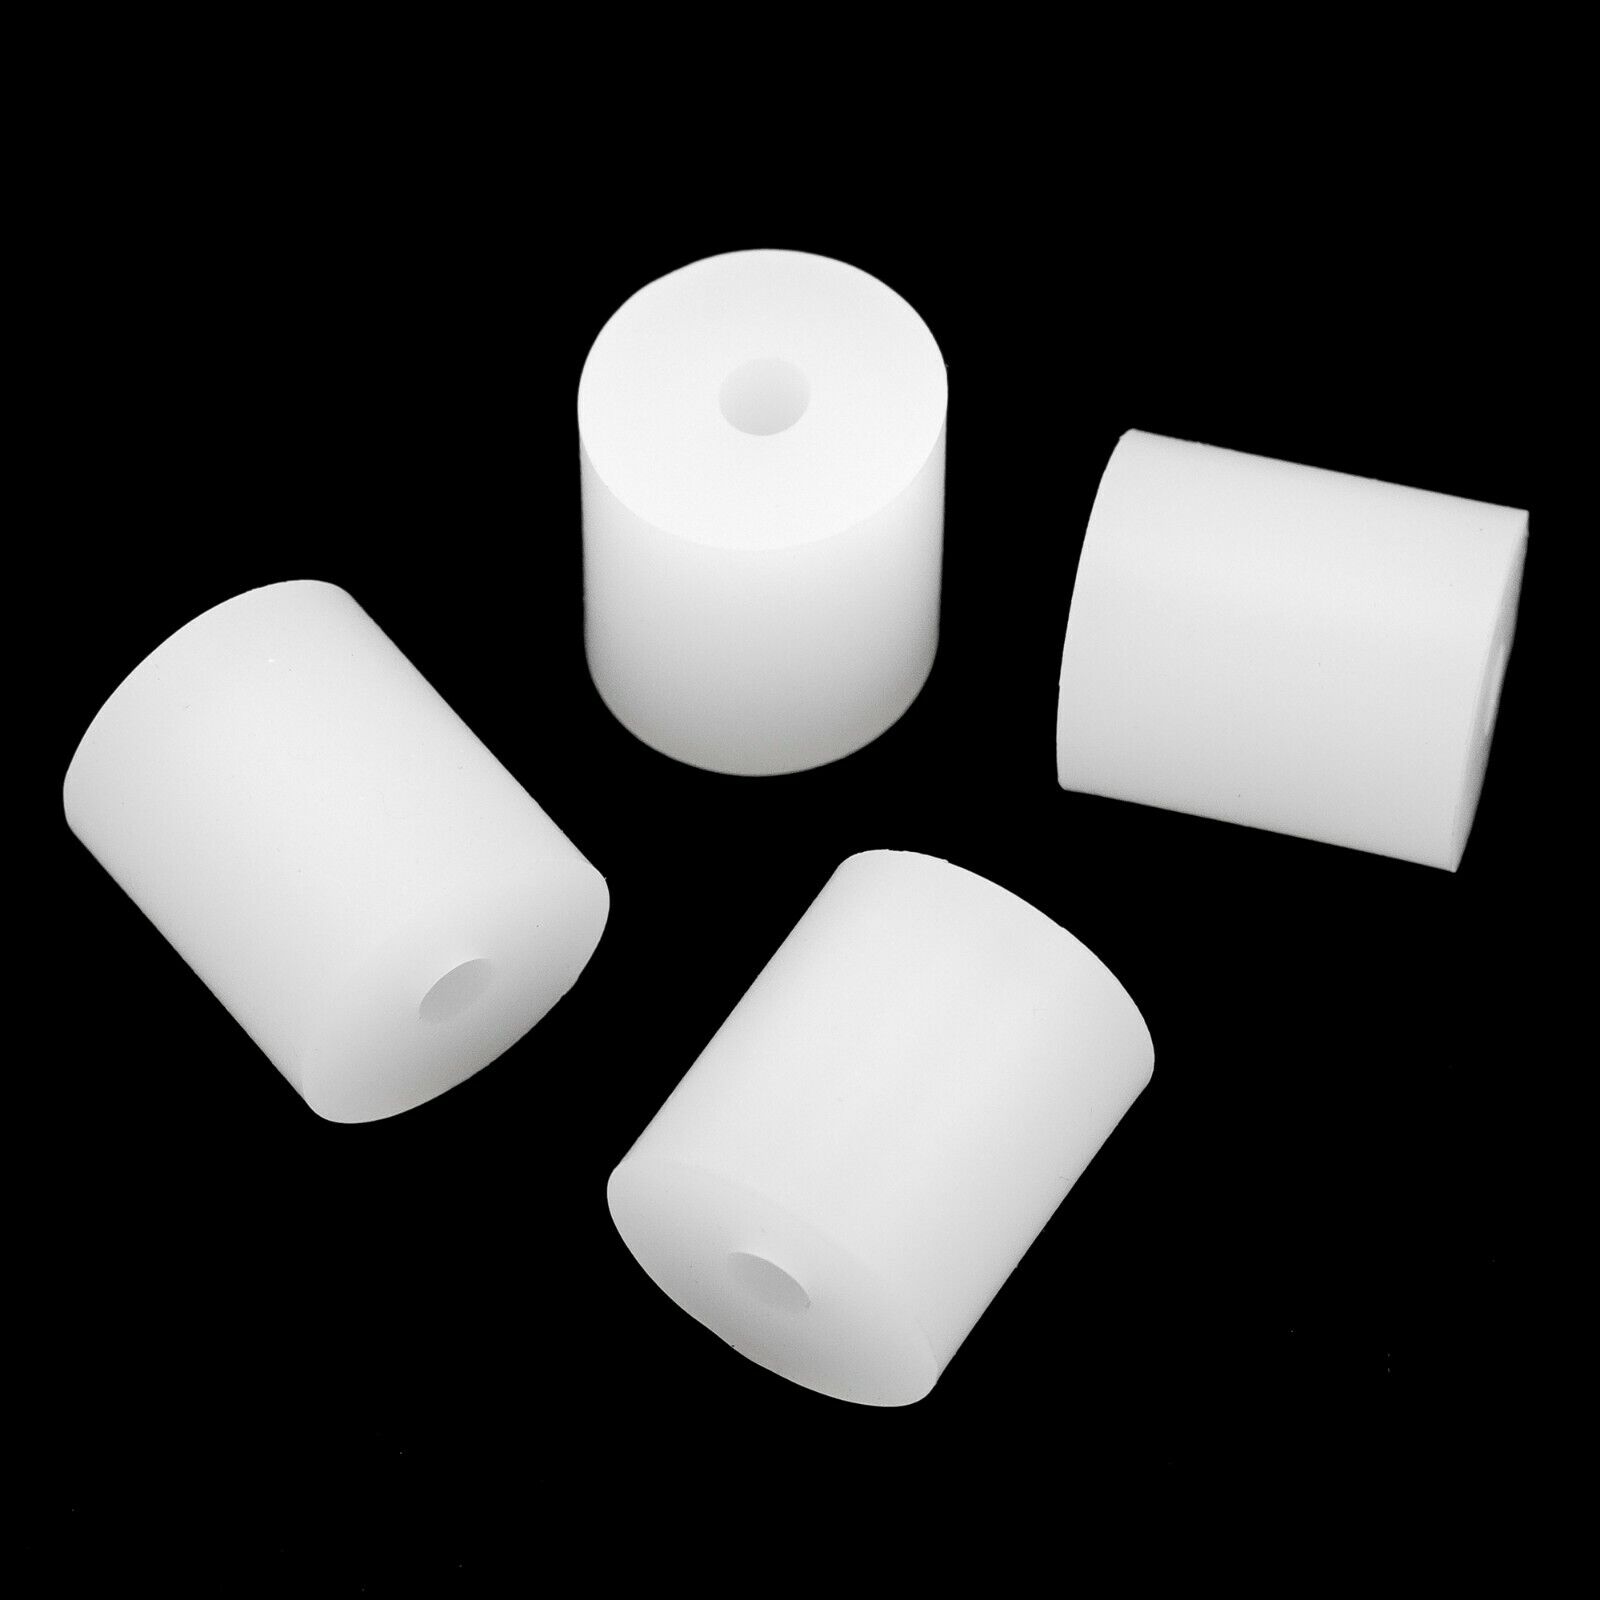 4pcs 3D Printer Hot Bed Levelling Column Silicone Spacer For CR-10 CR10S Ender-3